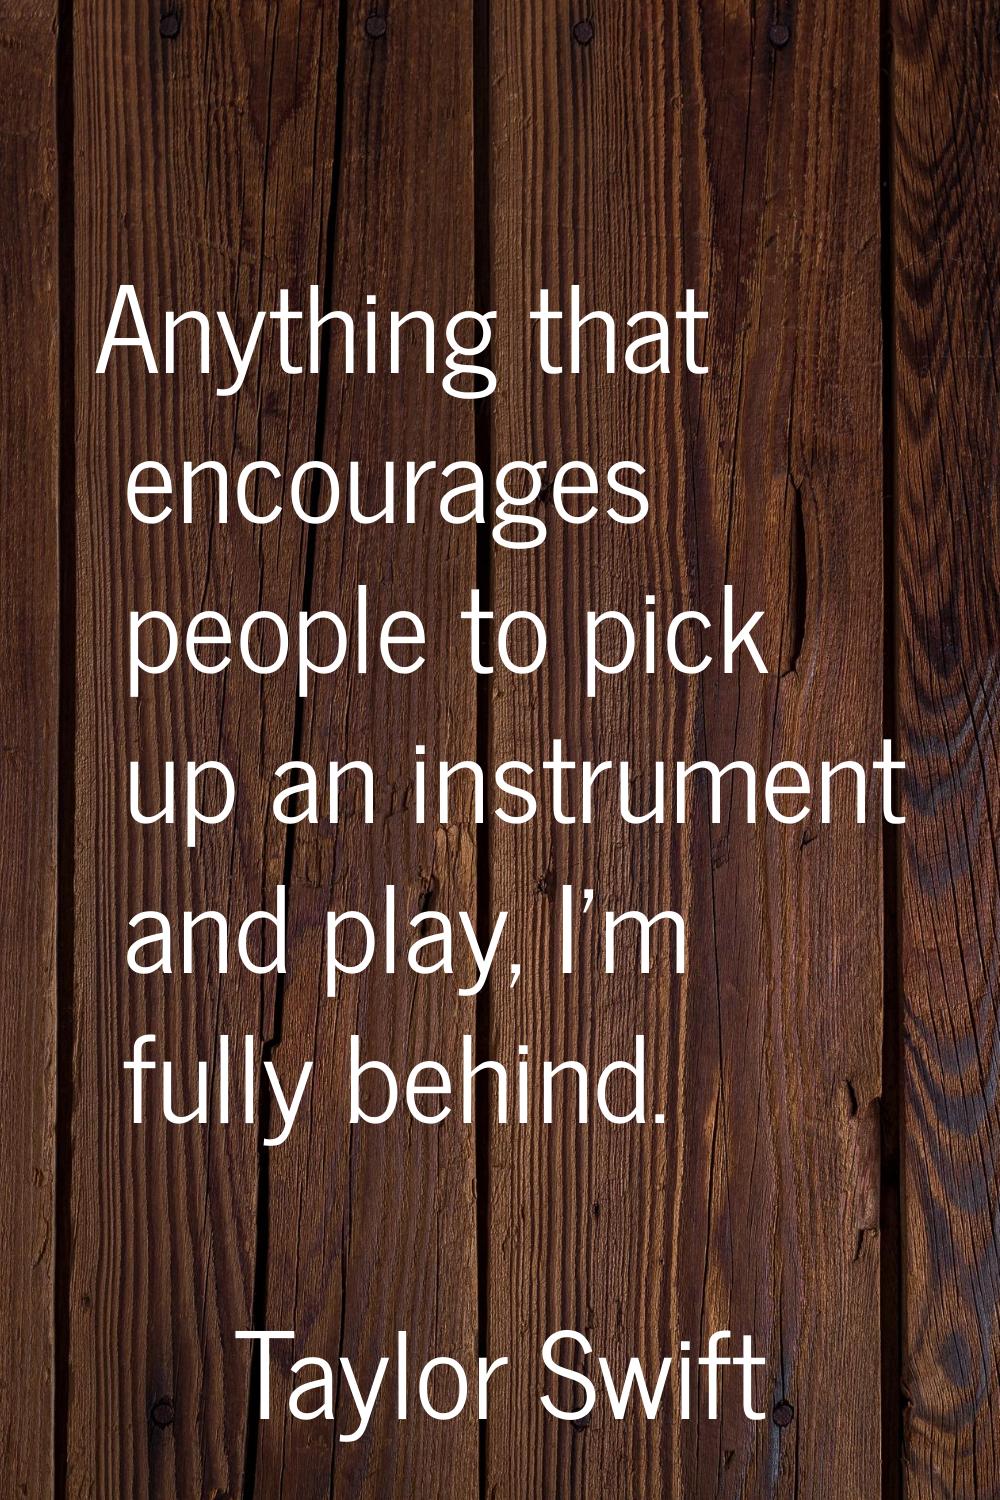 Anything that encourages people to pick up an instrument and play, I'm fully behind.